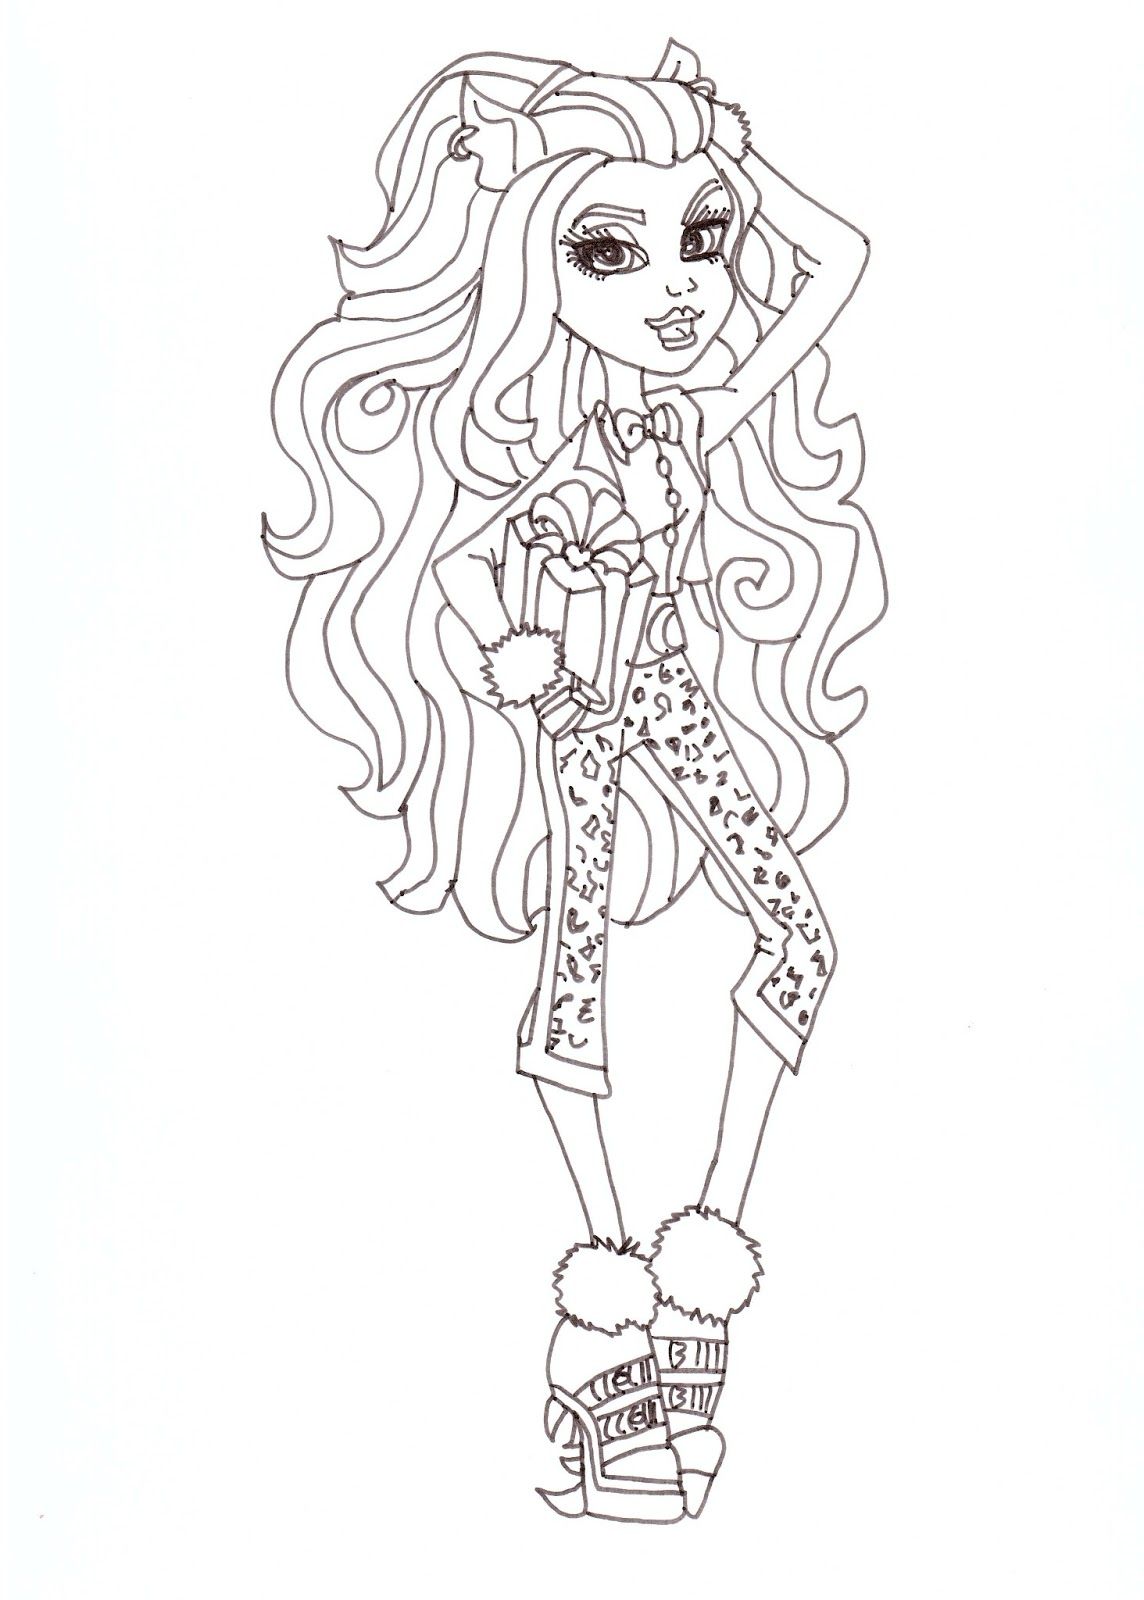 Clawdeen Wolf Coloring Pages To Print Coloring Pages For All Ages Coloring Home